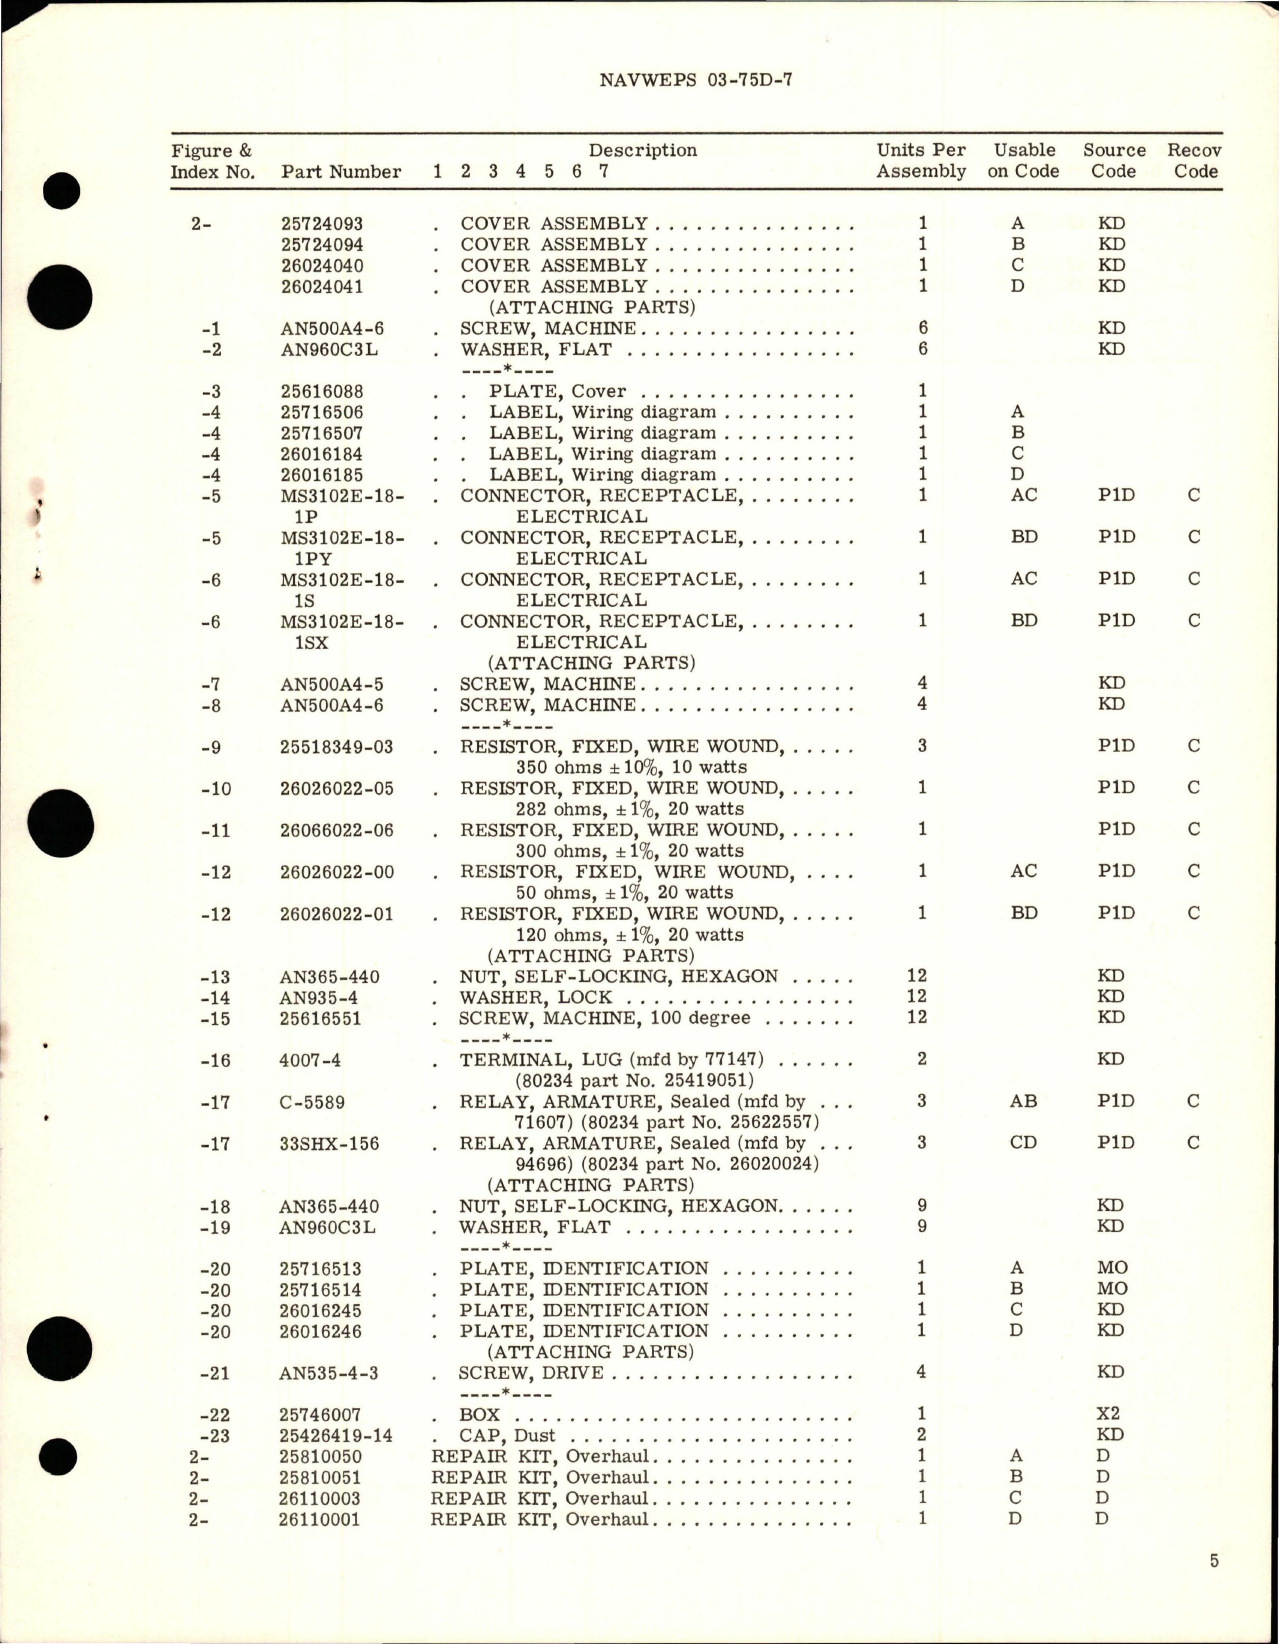 Sample page 5 from AirCorps Library document: Overhaul Instructions with Illustrated Parts Breakdown for Temperature Control Box